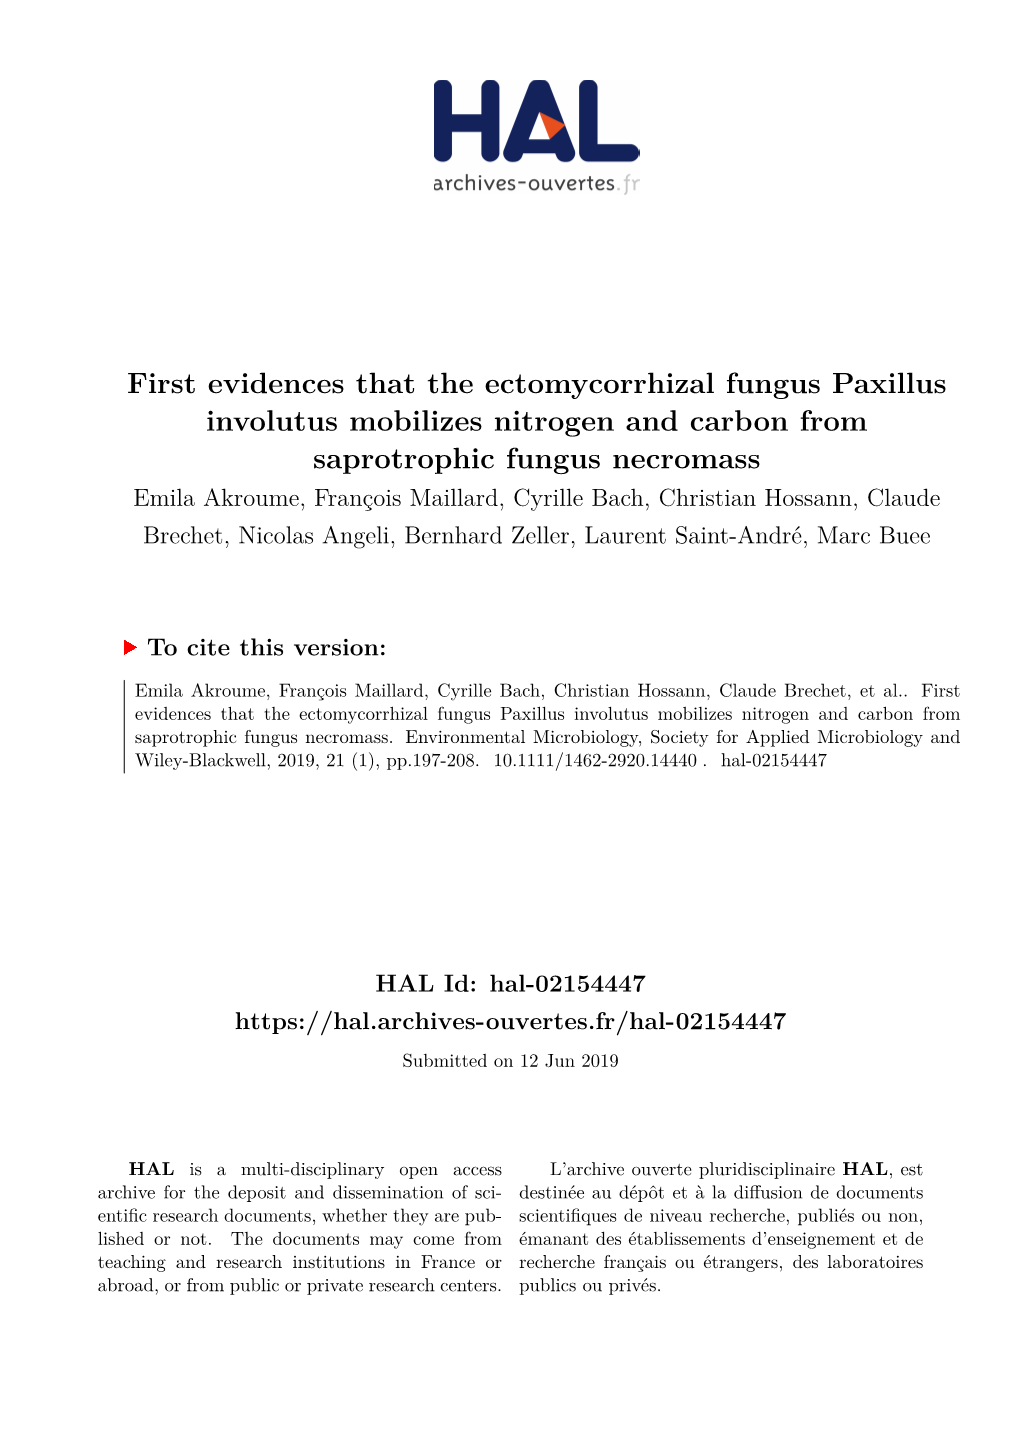 First Evidences That the Ectomycorrhizal Fungus Paxillus